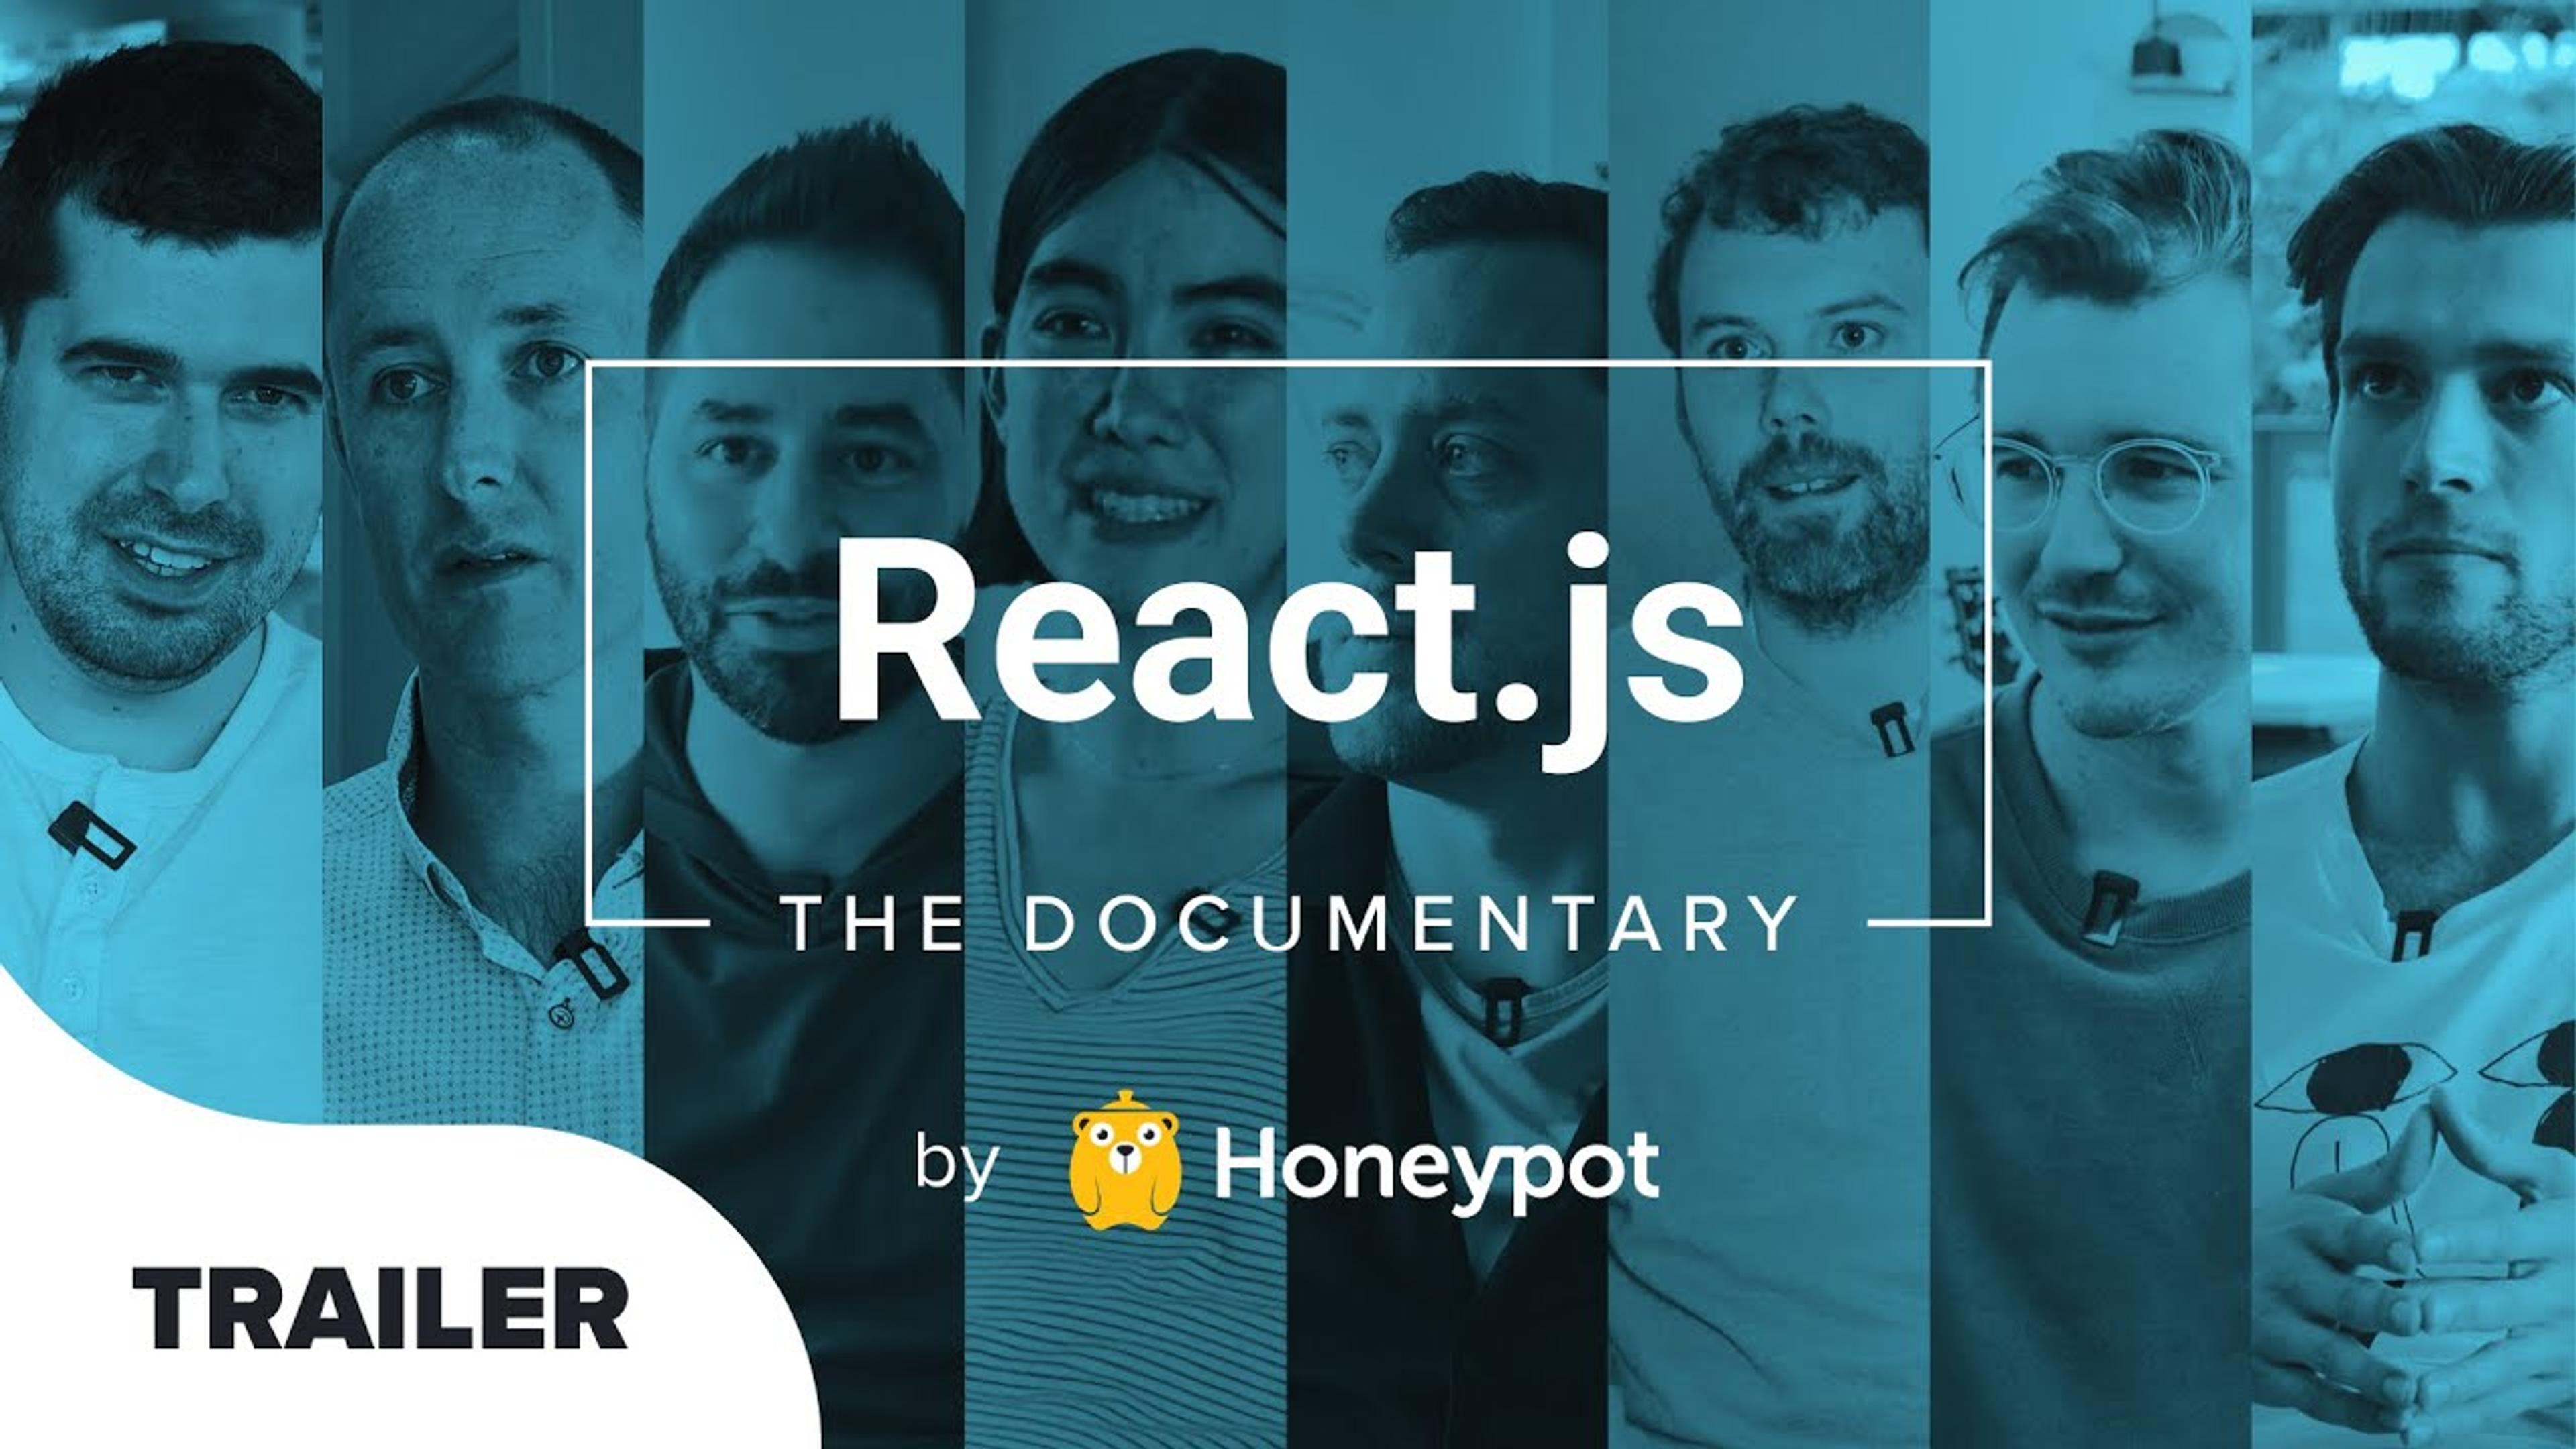 React.js The Documentary by Honeypot